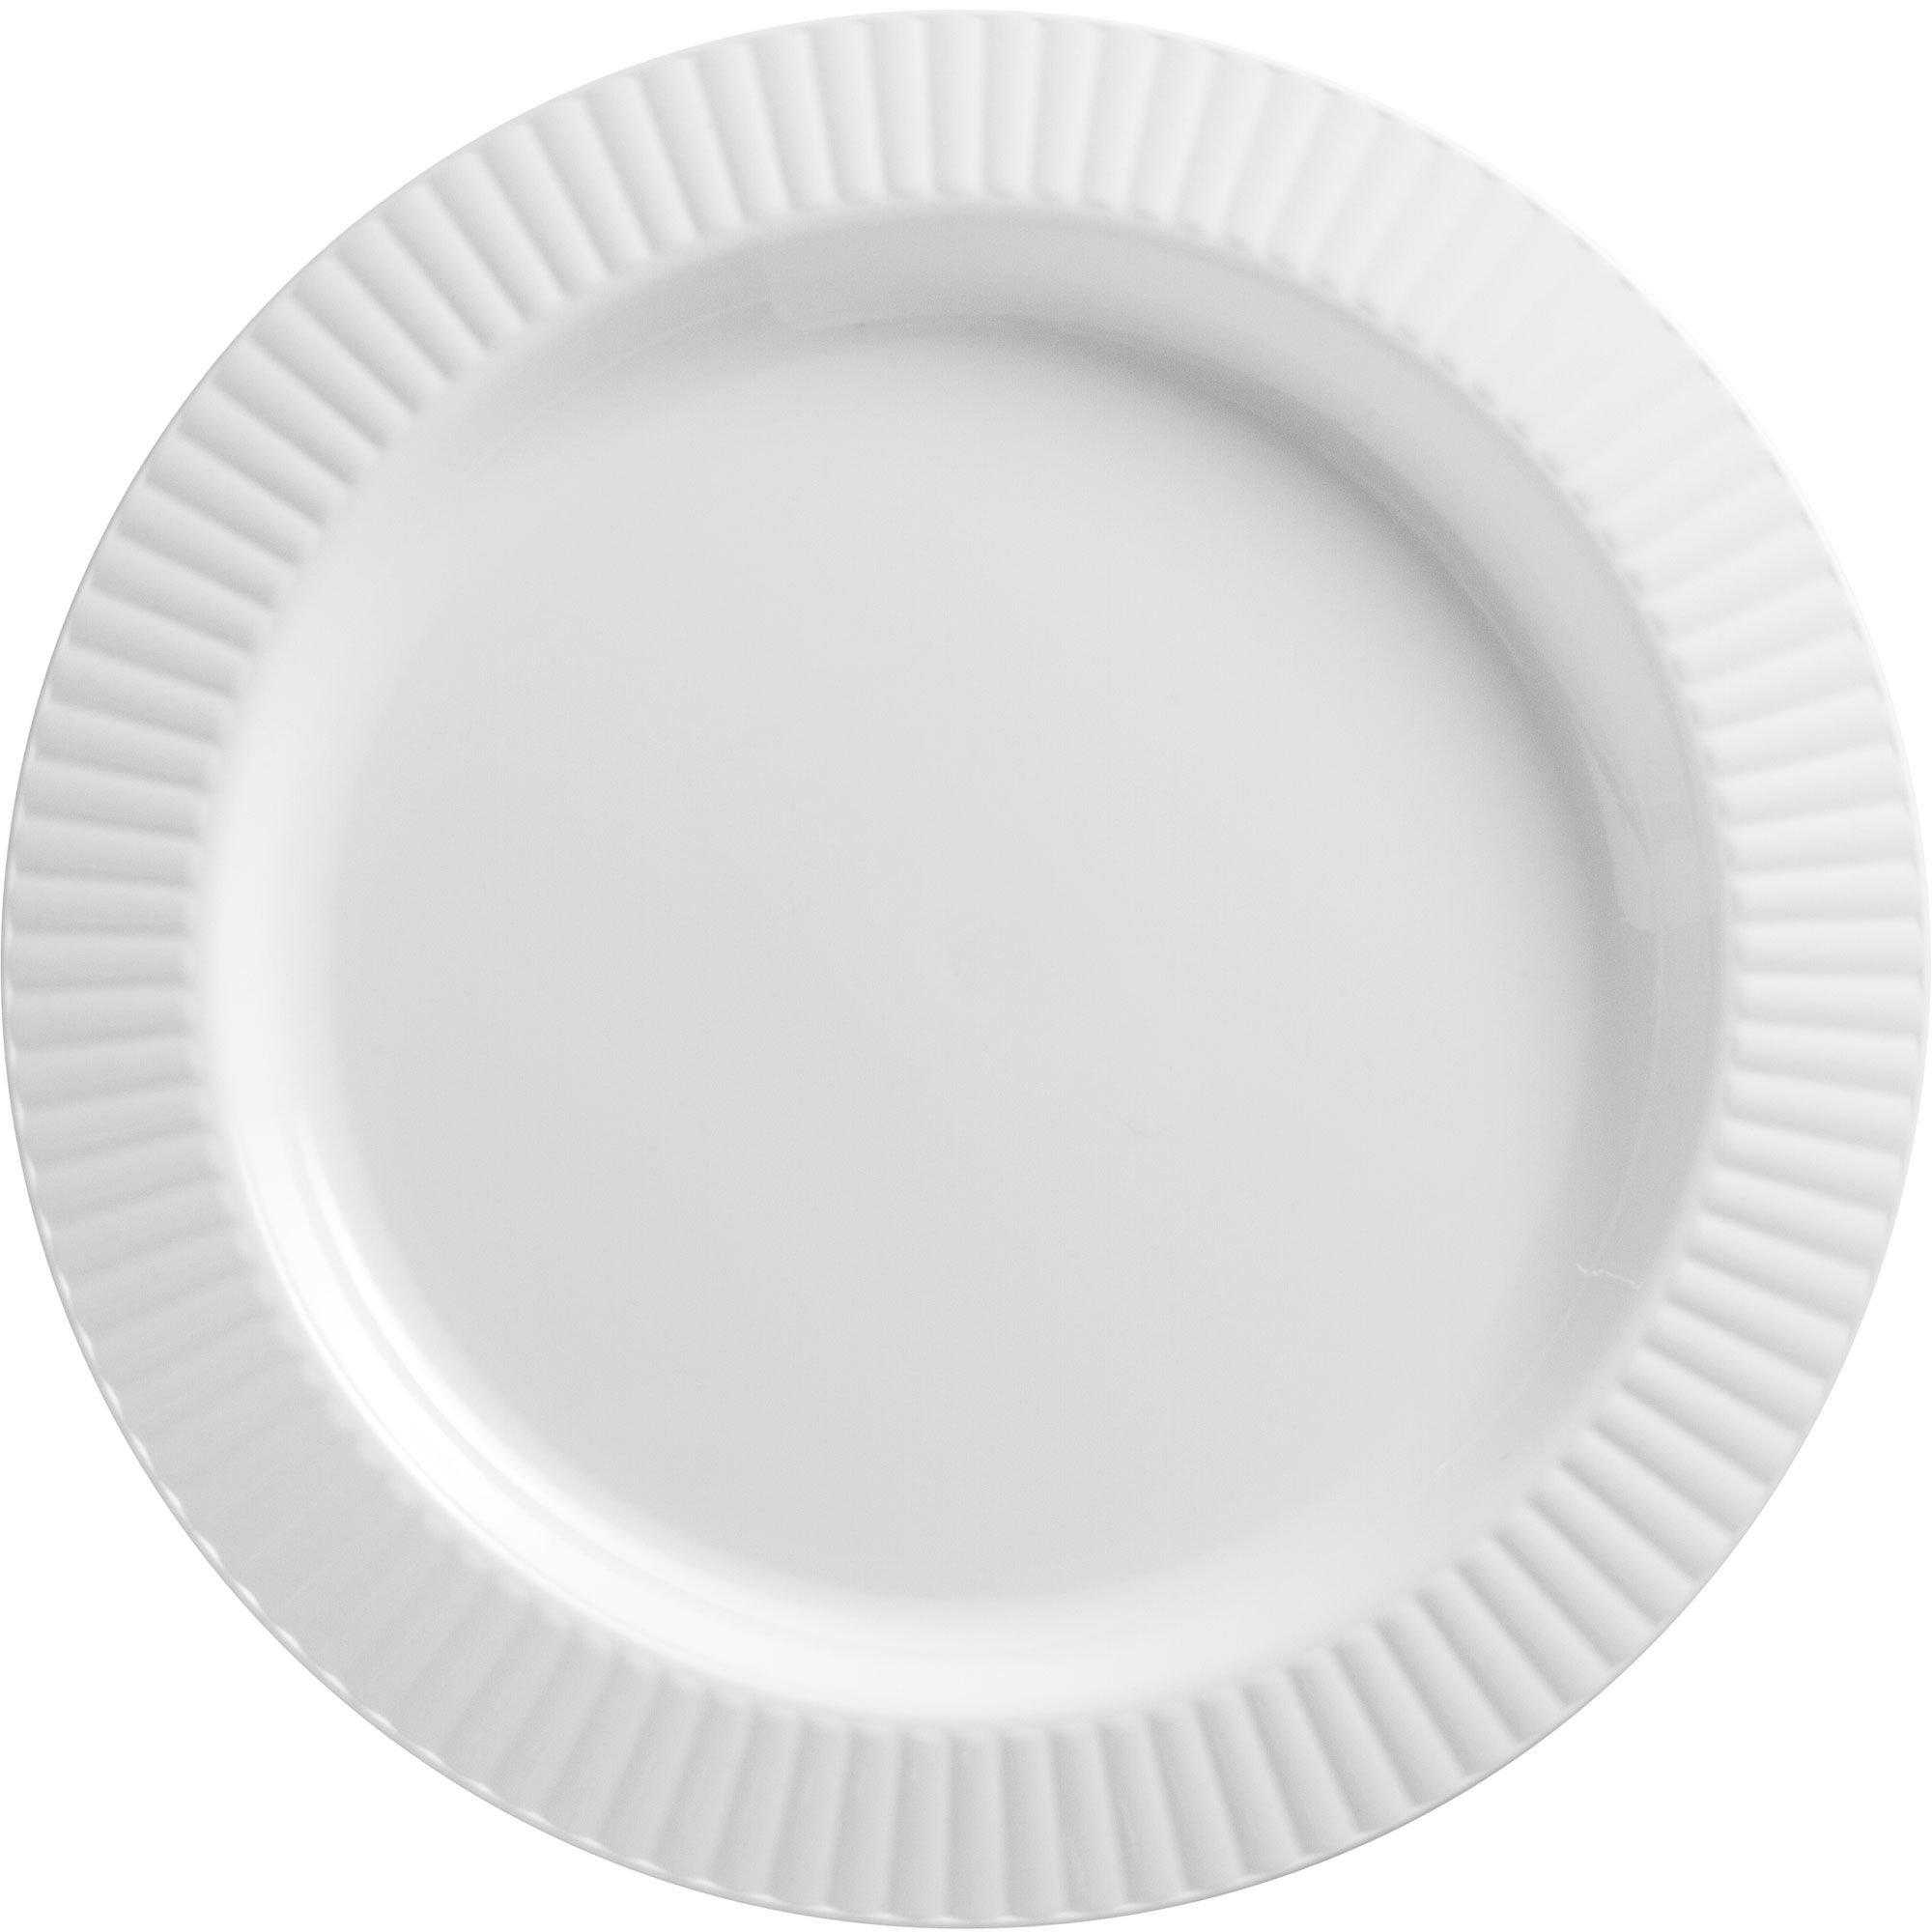 200 Disposable 7 PLASTIC PLATES - - White party ware light weight reusable